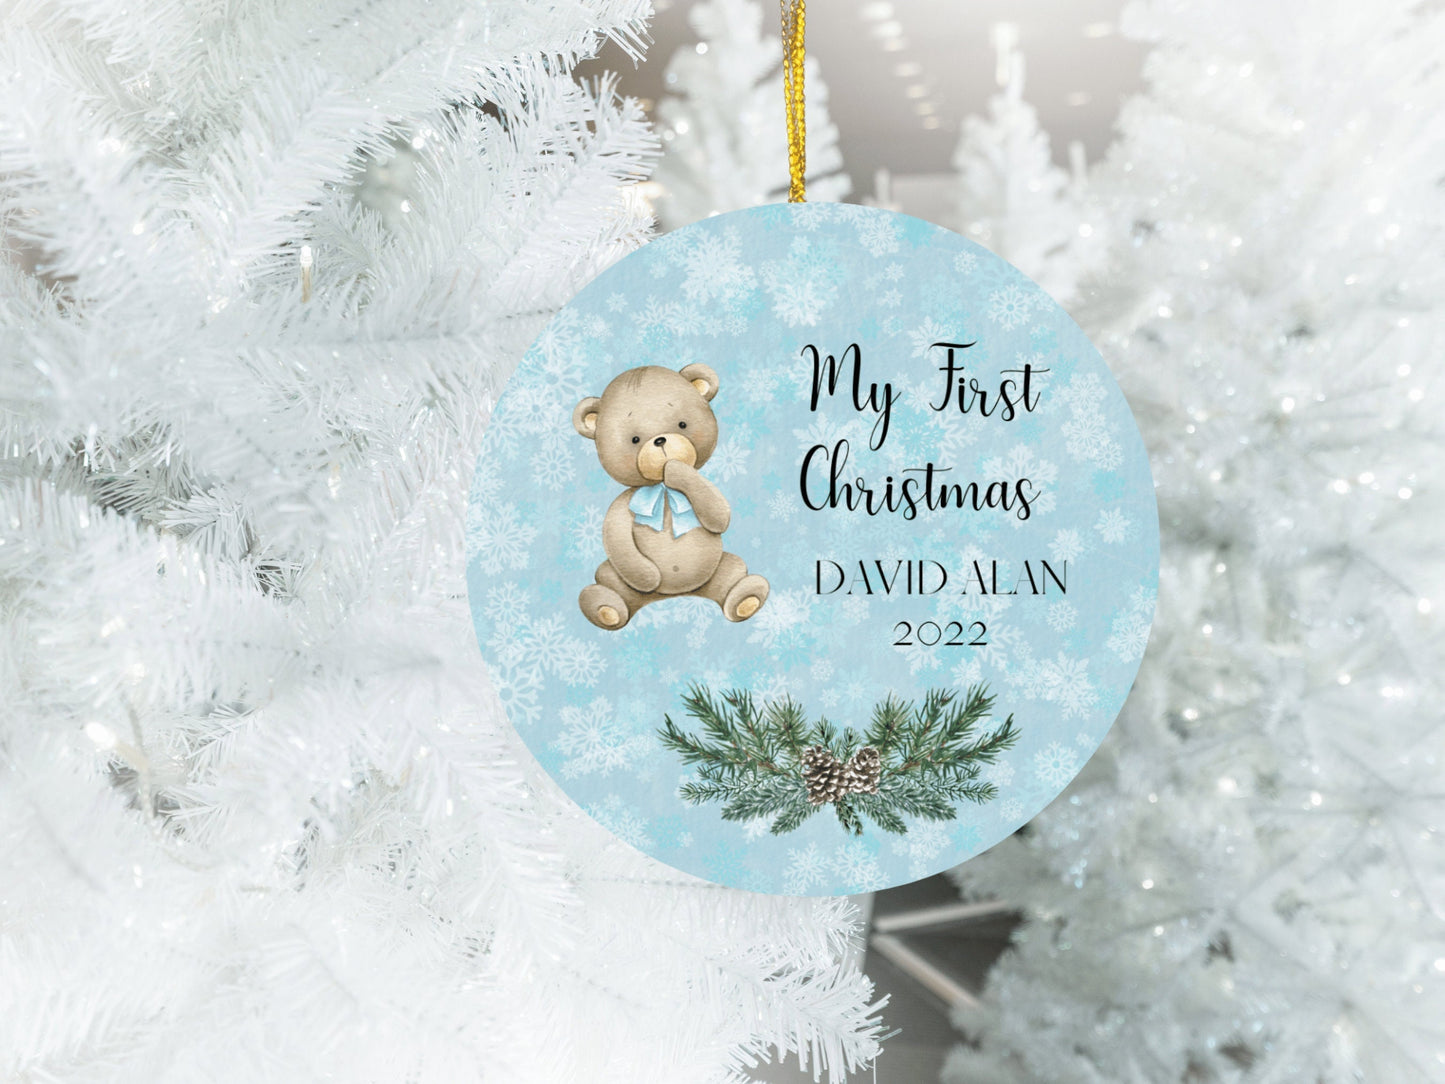 Baby's First Christmas Ornament, Personalized Baby's Christmas Keepsake, New Baby Gift, Baby Bear Ornament, 2023 Custom Baby Ornament